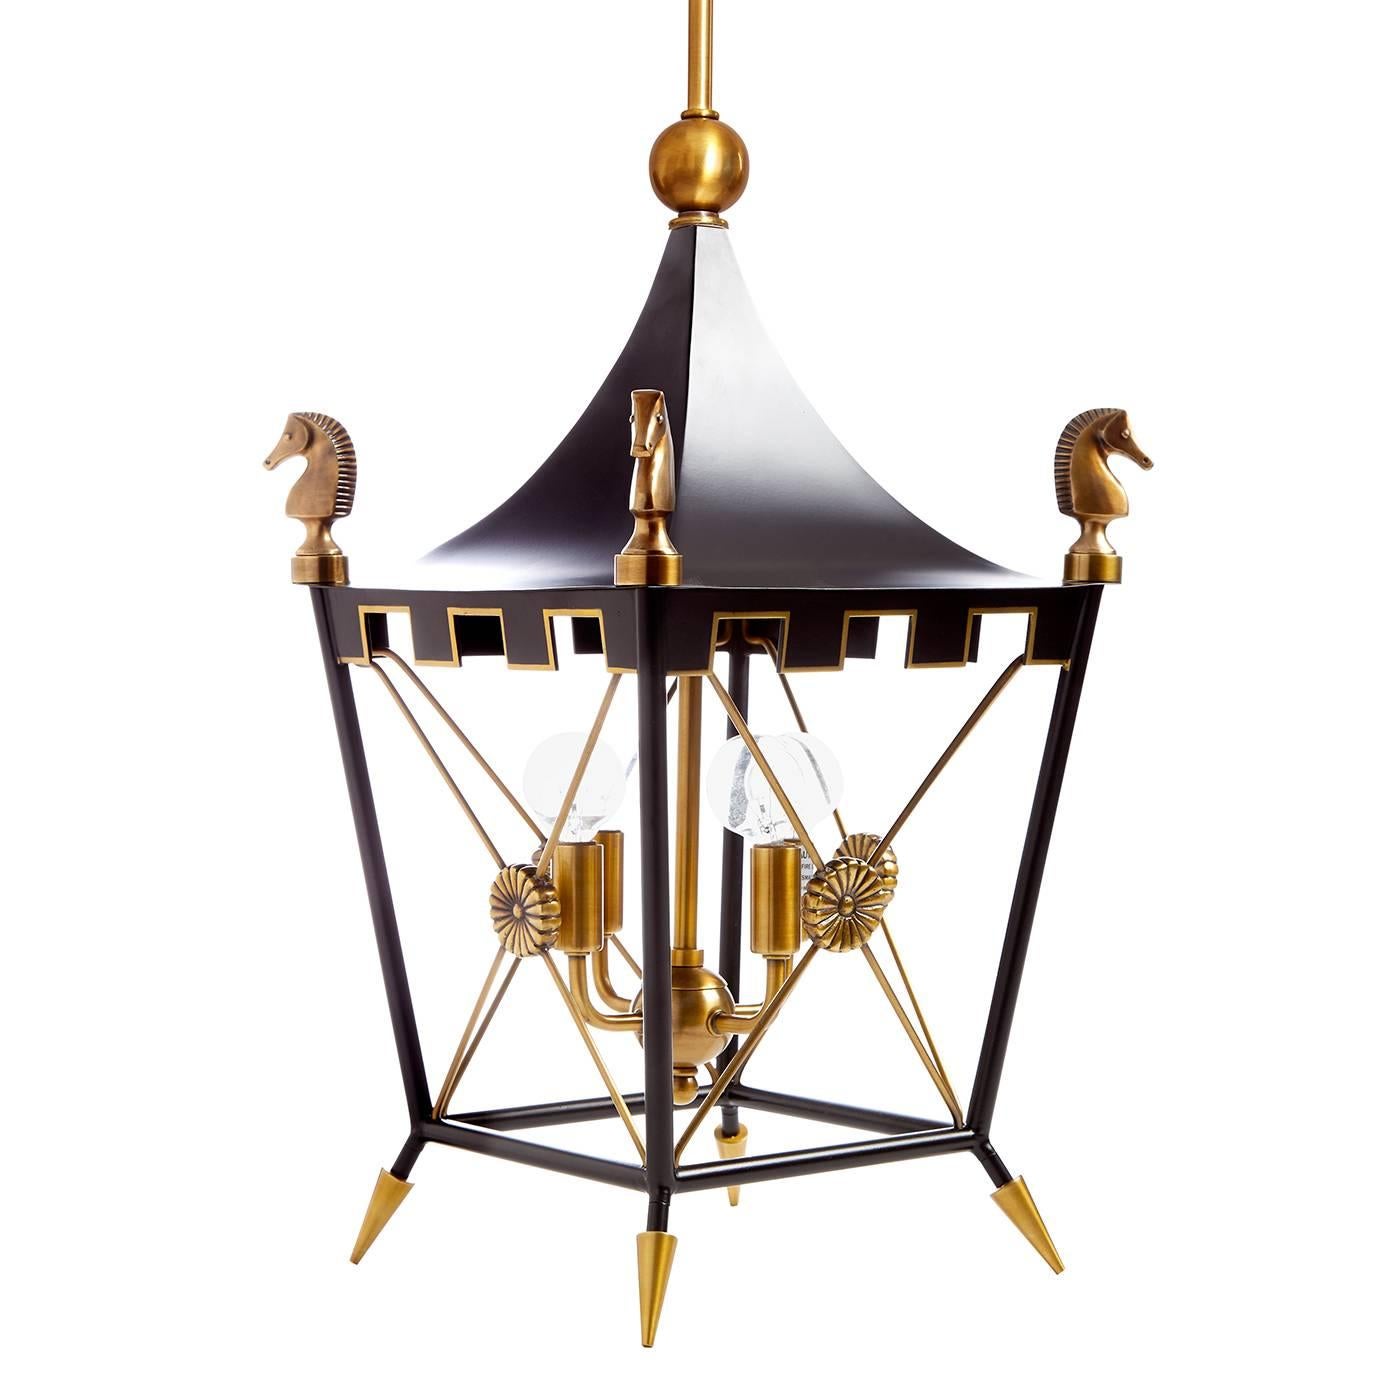 Parisian flair. The iconic pagoda pendant gets a neo neoclassical update. Our signature Rider accents abound: custom-crafted horse finials, powder-coated brass, antiqued brass medallions and turreted edges with gold hand-painted details for added